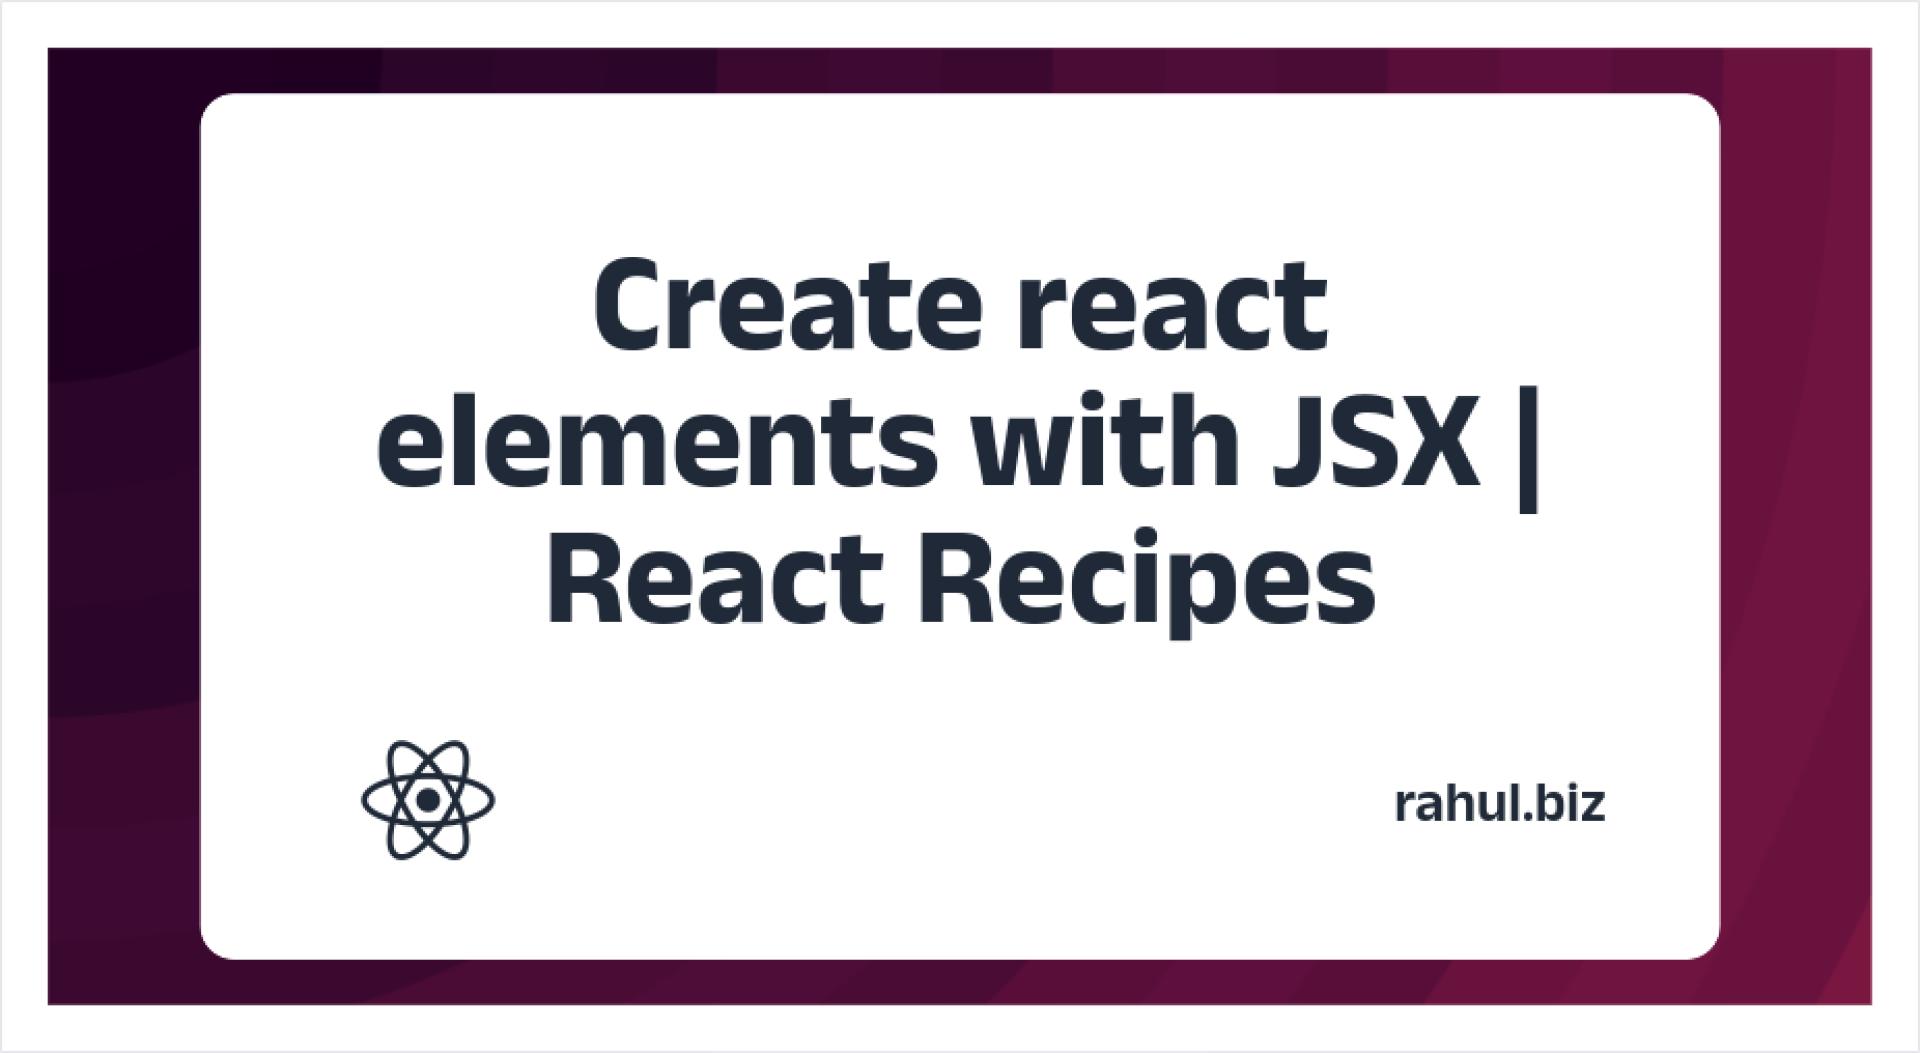 How to create react elements with JSX | React Recipes